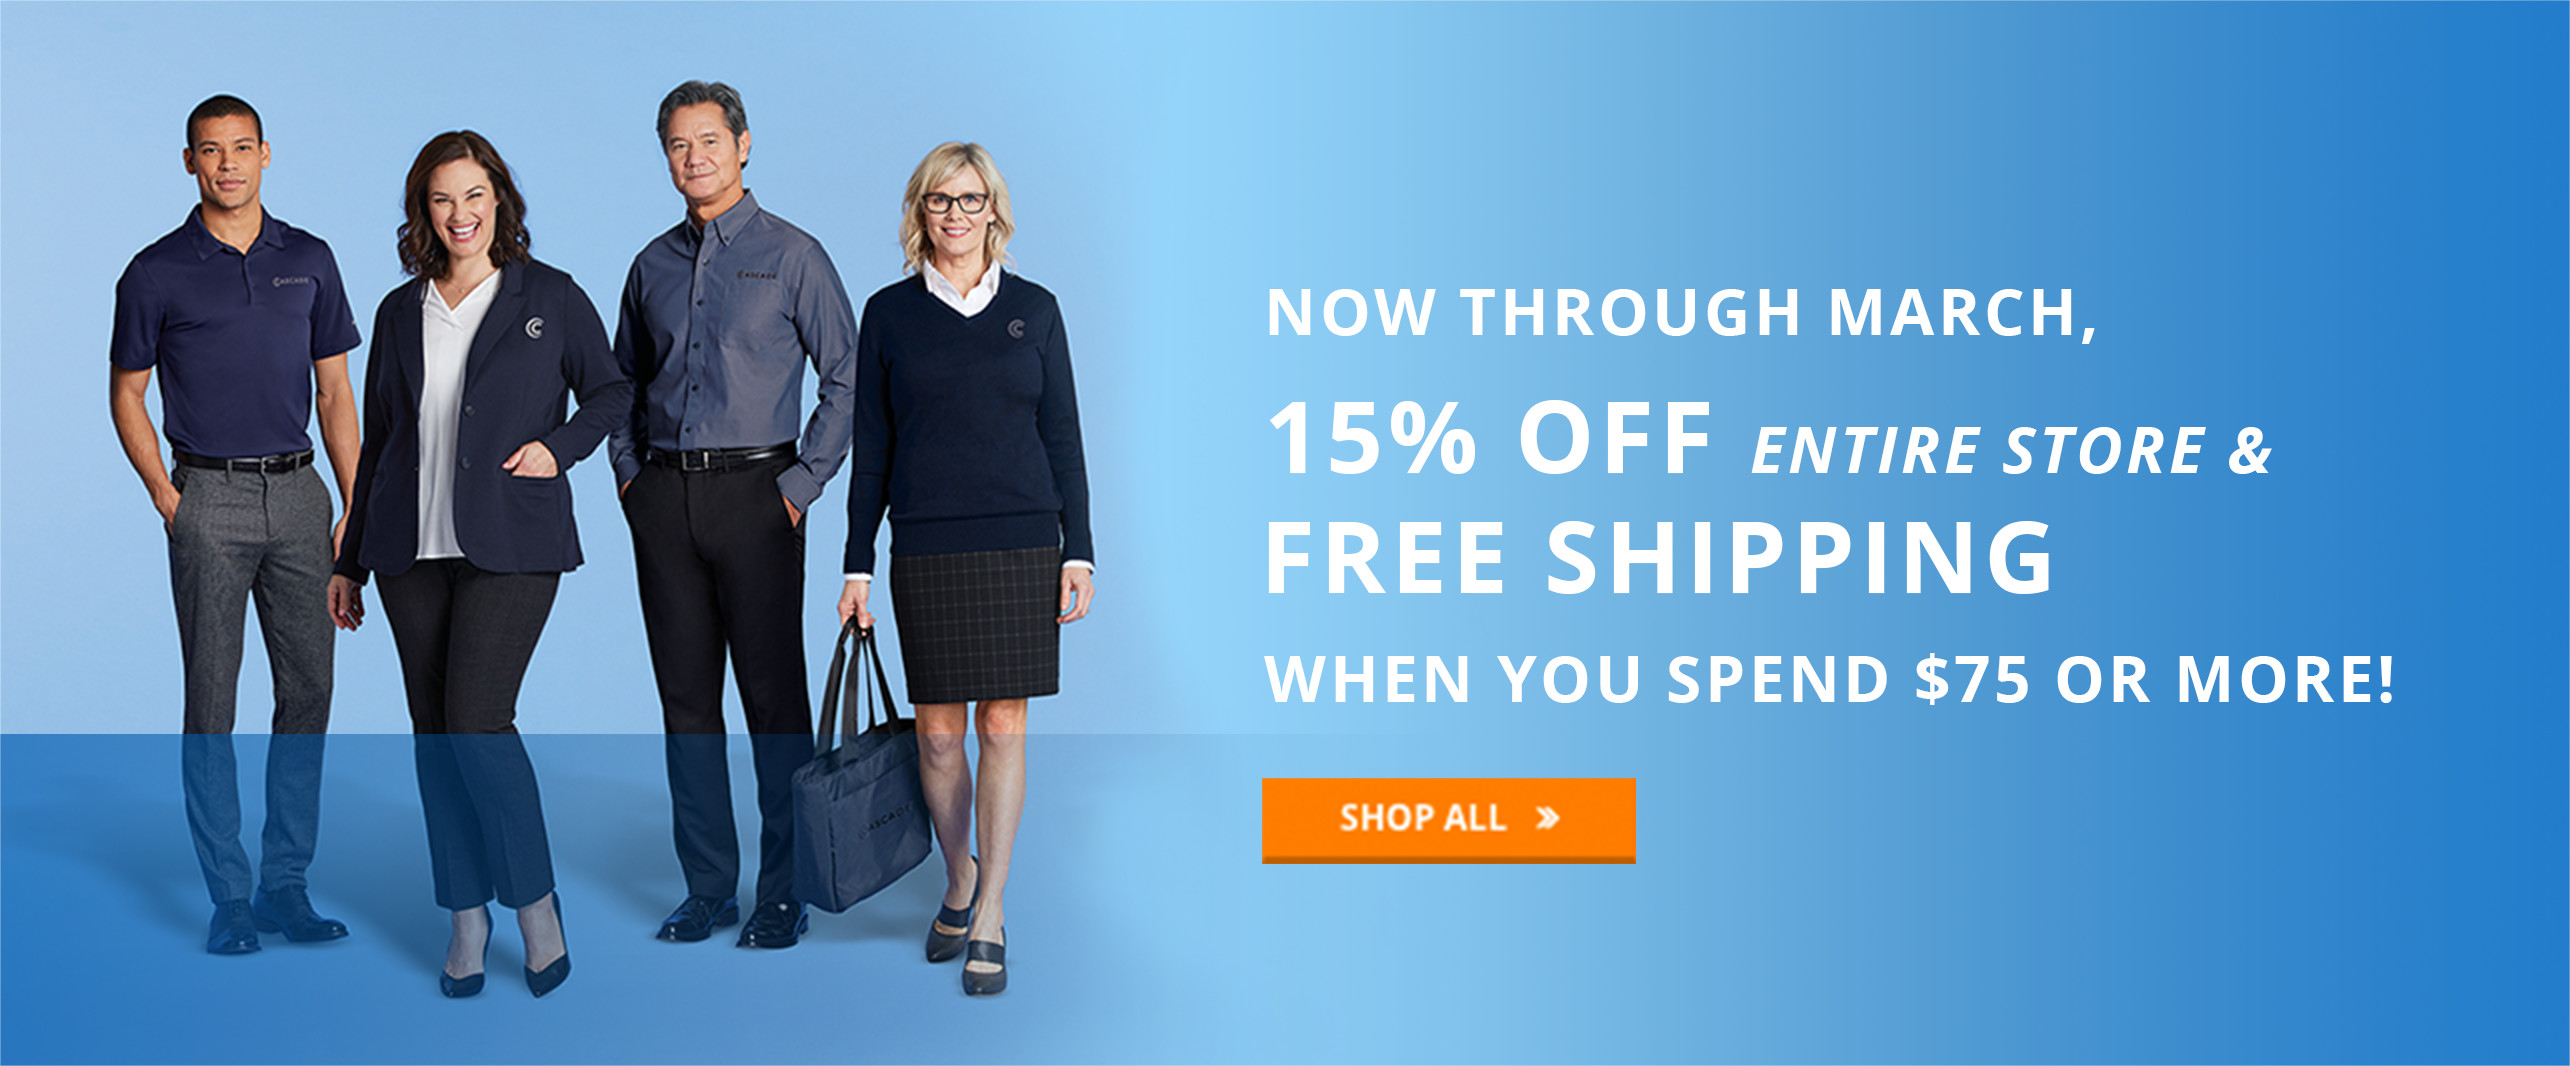 Now through March, 15% off entire store & free shipping when you spend $75 or more!